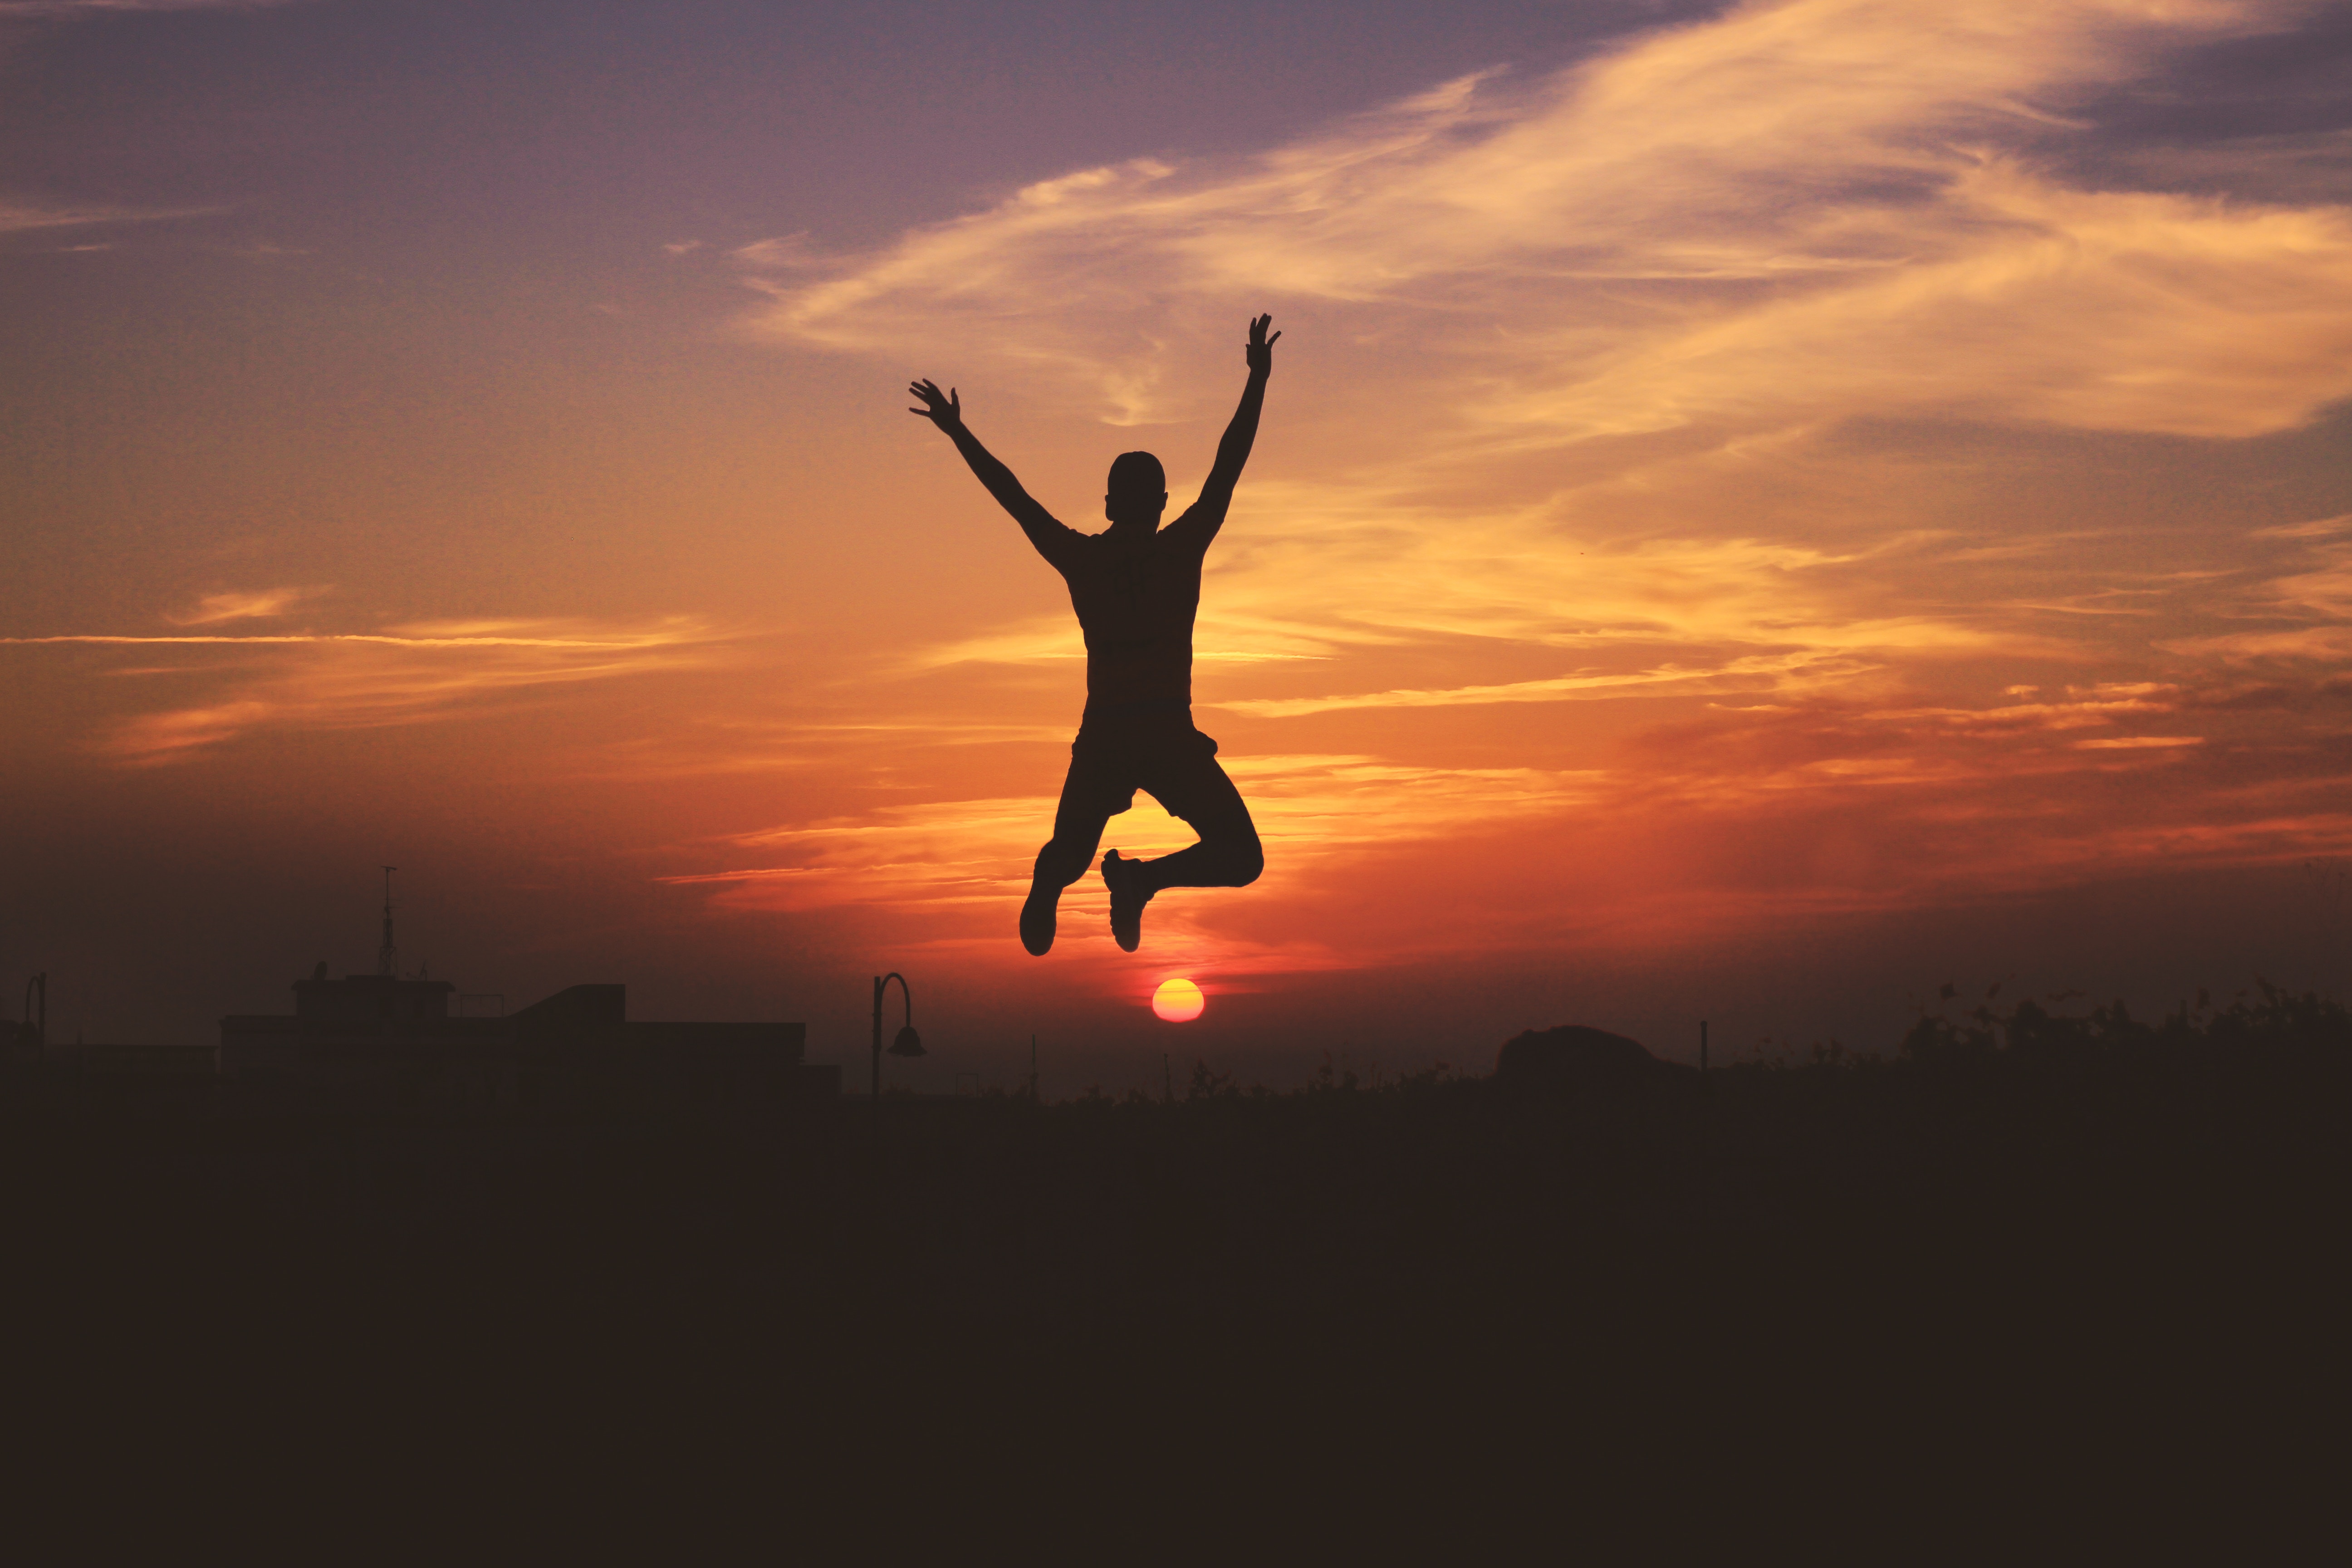 Download background sunset, sky, dark, silhouette, human, person, bounce, jump